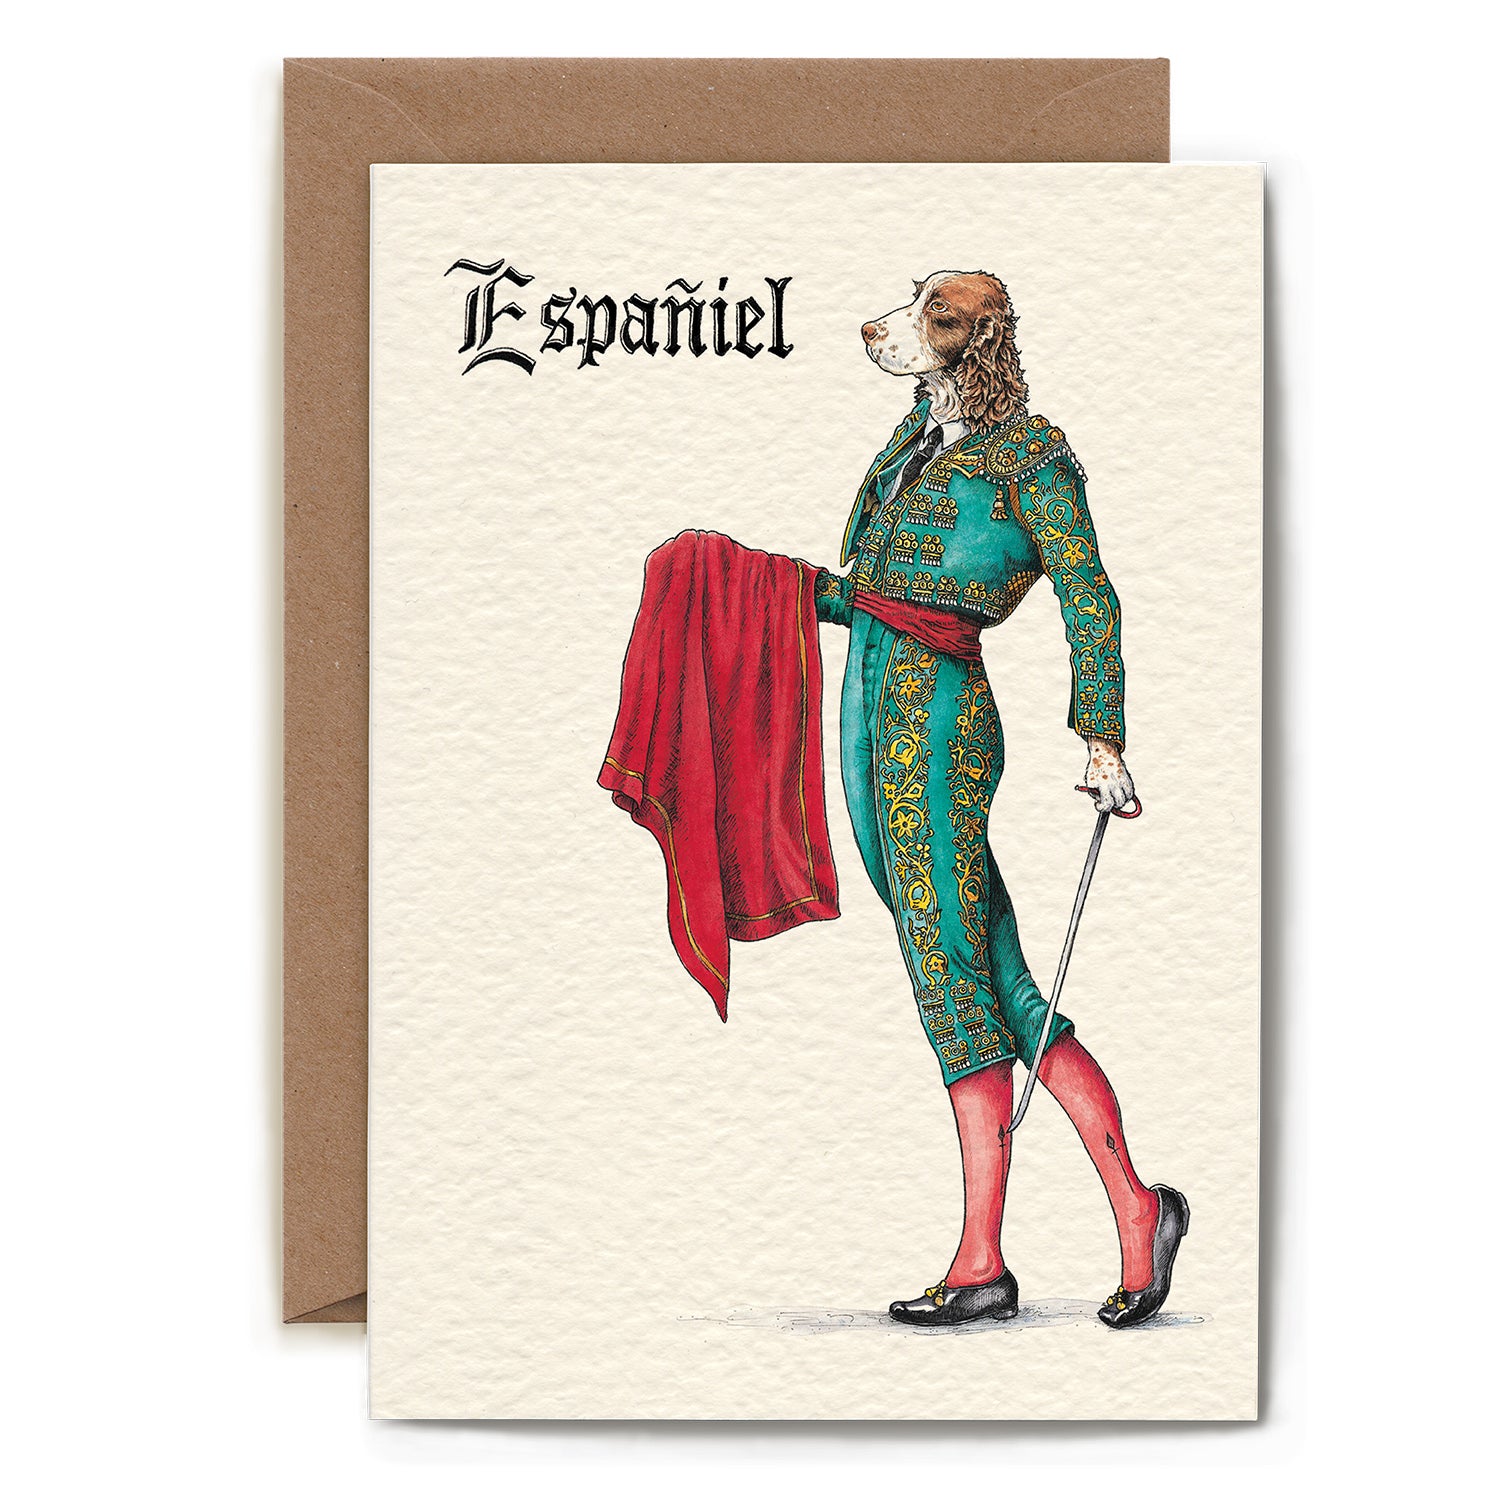 A Hester &amp; Cook Españiel Card featuring an illustration of a Spanish dog.